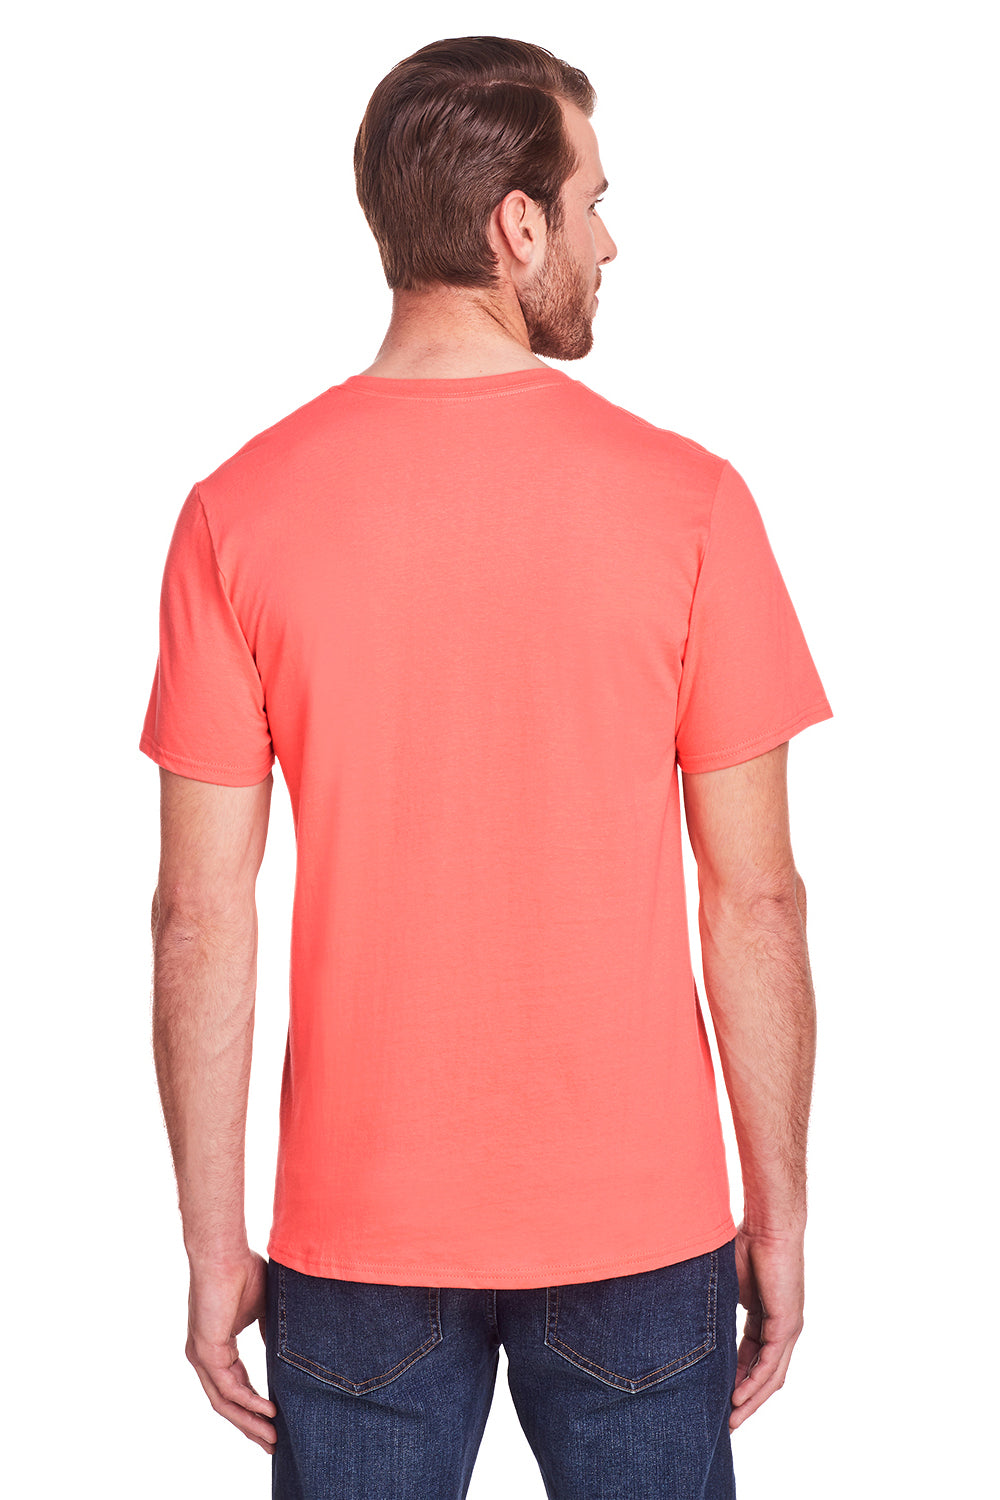 Fruit Of The Loom IC47MR Mens Iconic Short Sleeve Crewneck T-Shirt Coral Red Back